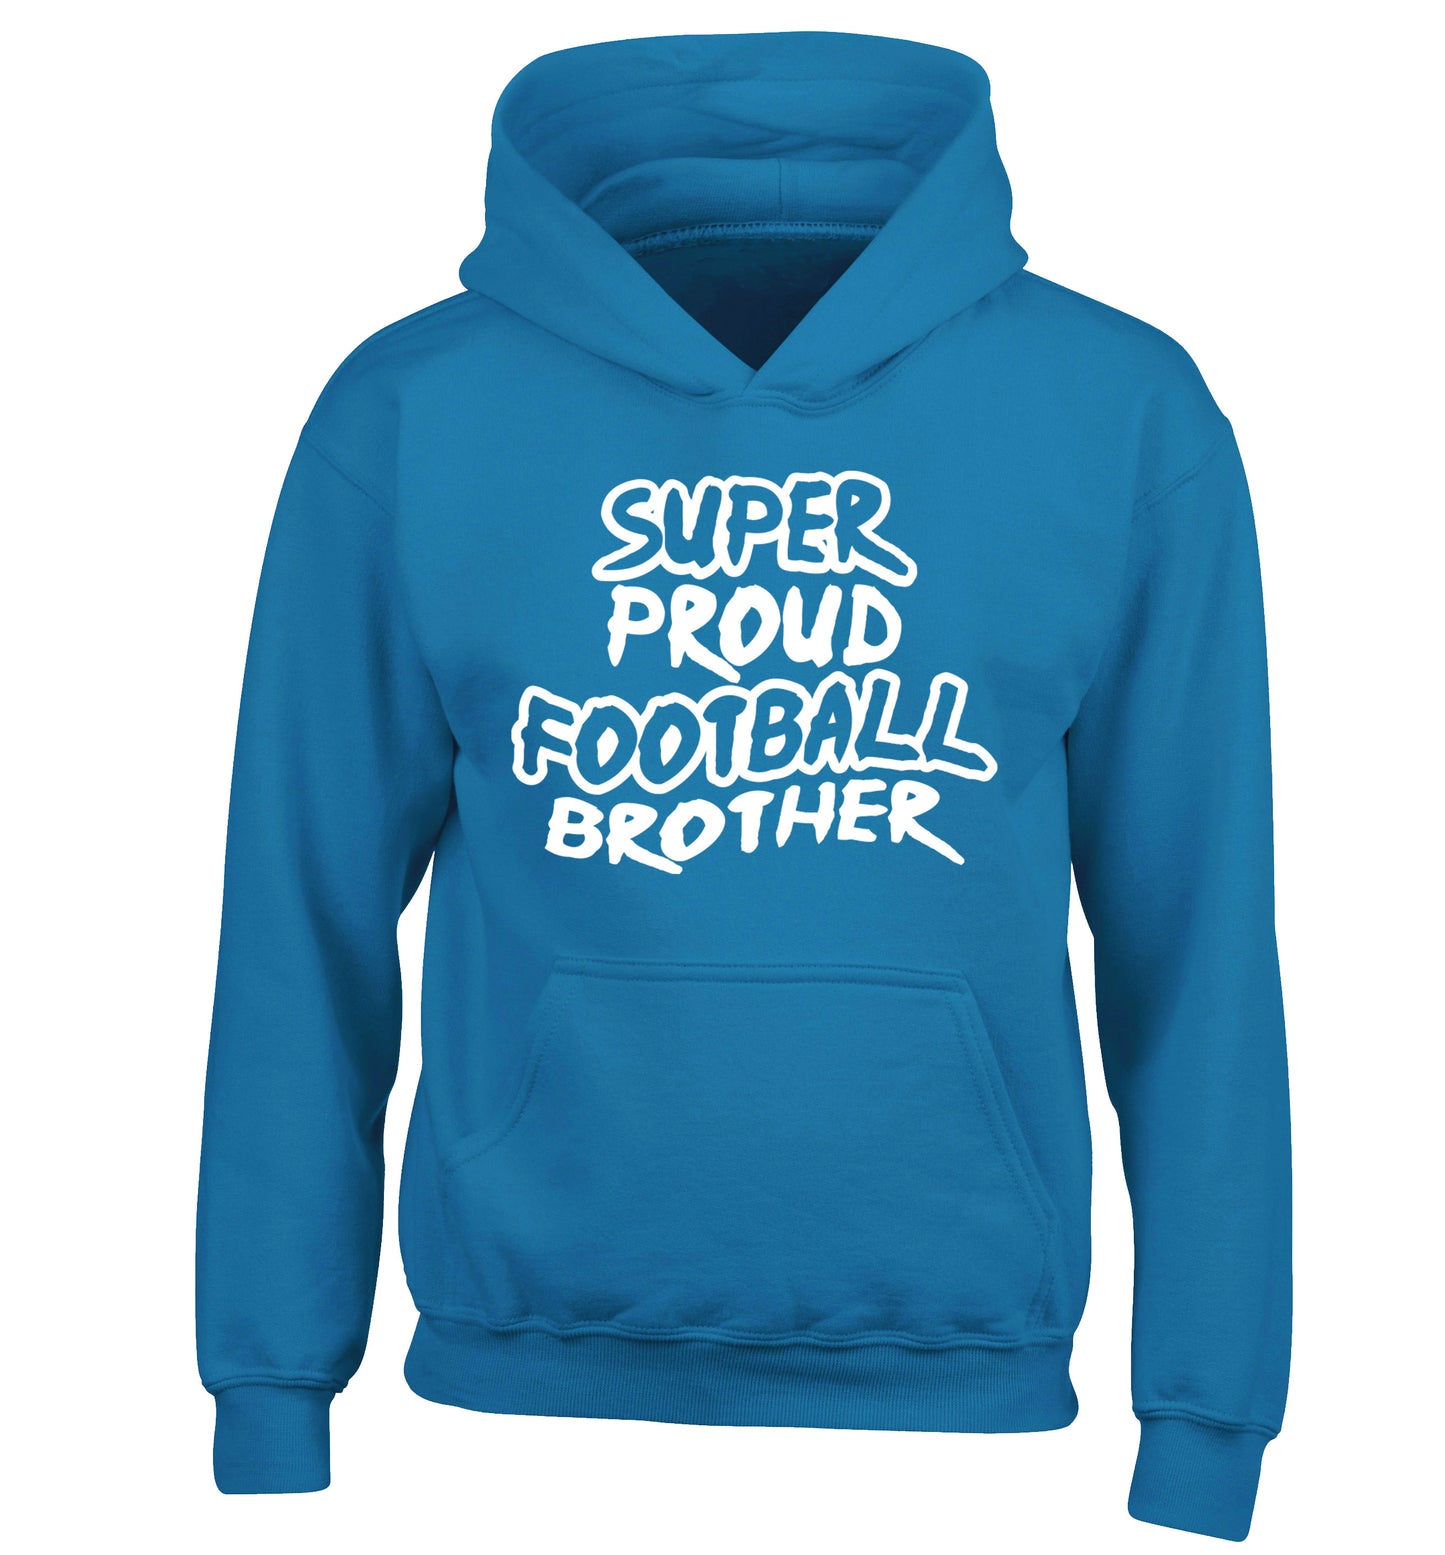 Super proud football brother children's blue hoodie 12-14 Years